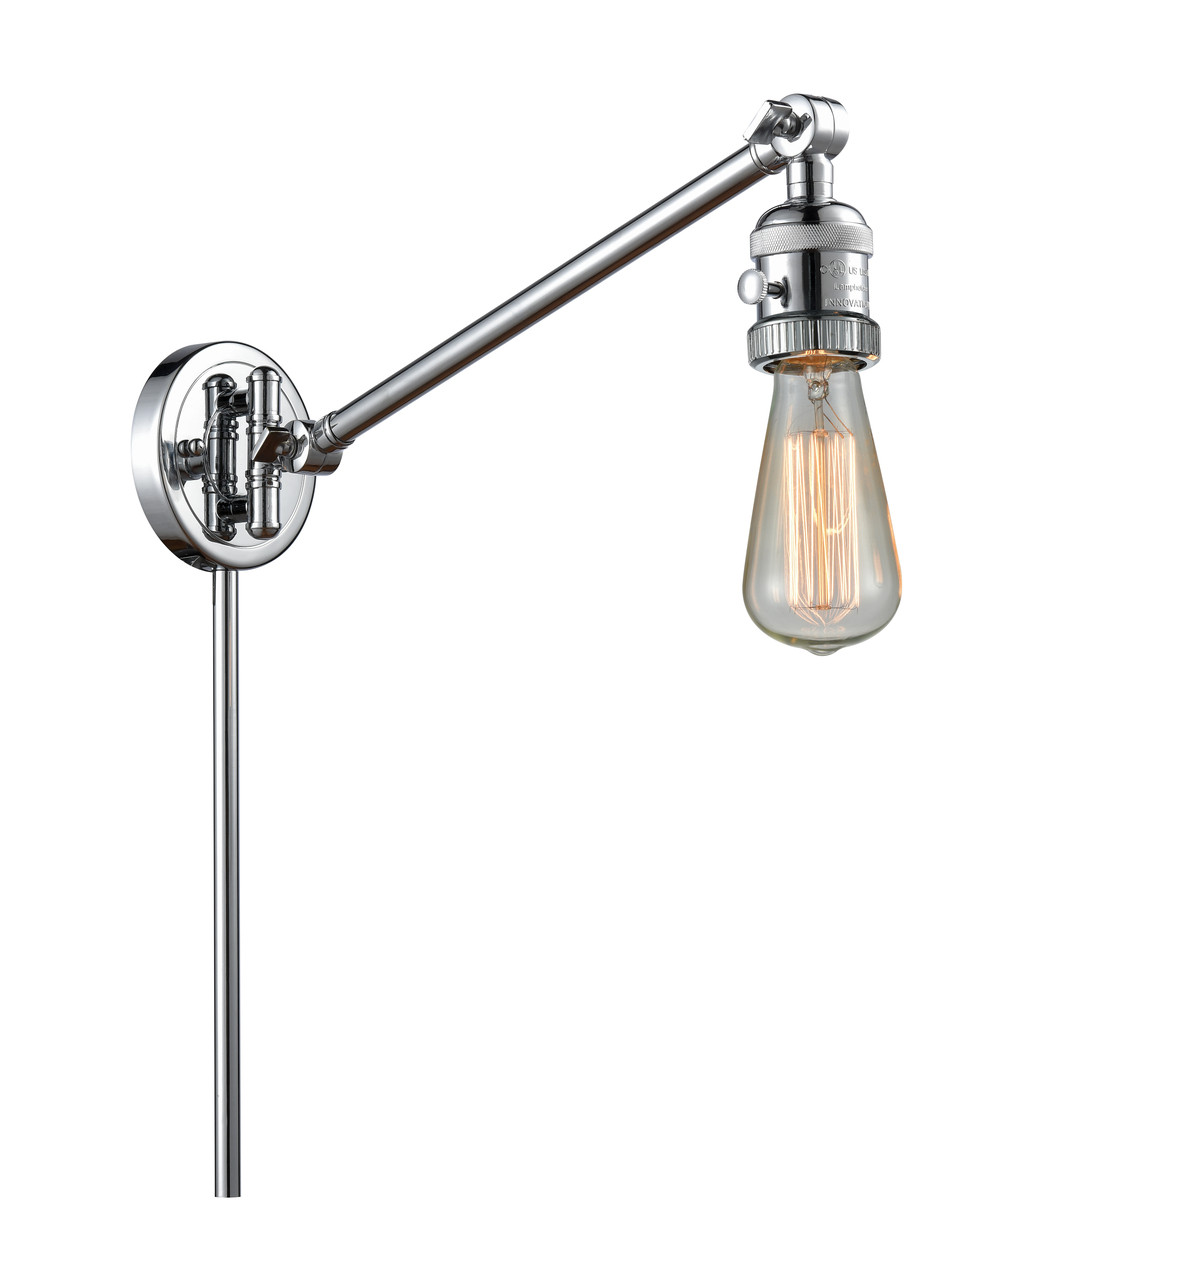 INNOVATIONS 237-PC Bare Bulb 1 Light 5 inch Swing Arm With Switch Polished Chrome